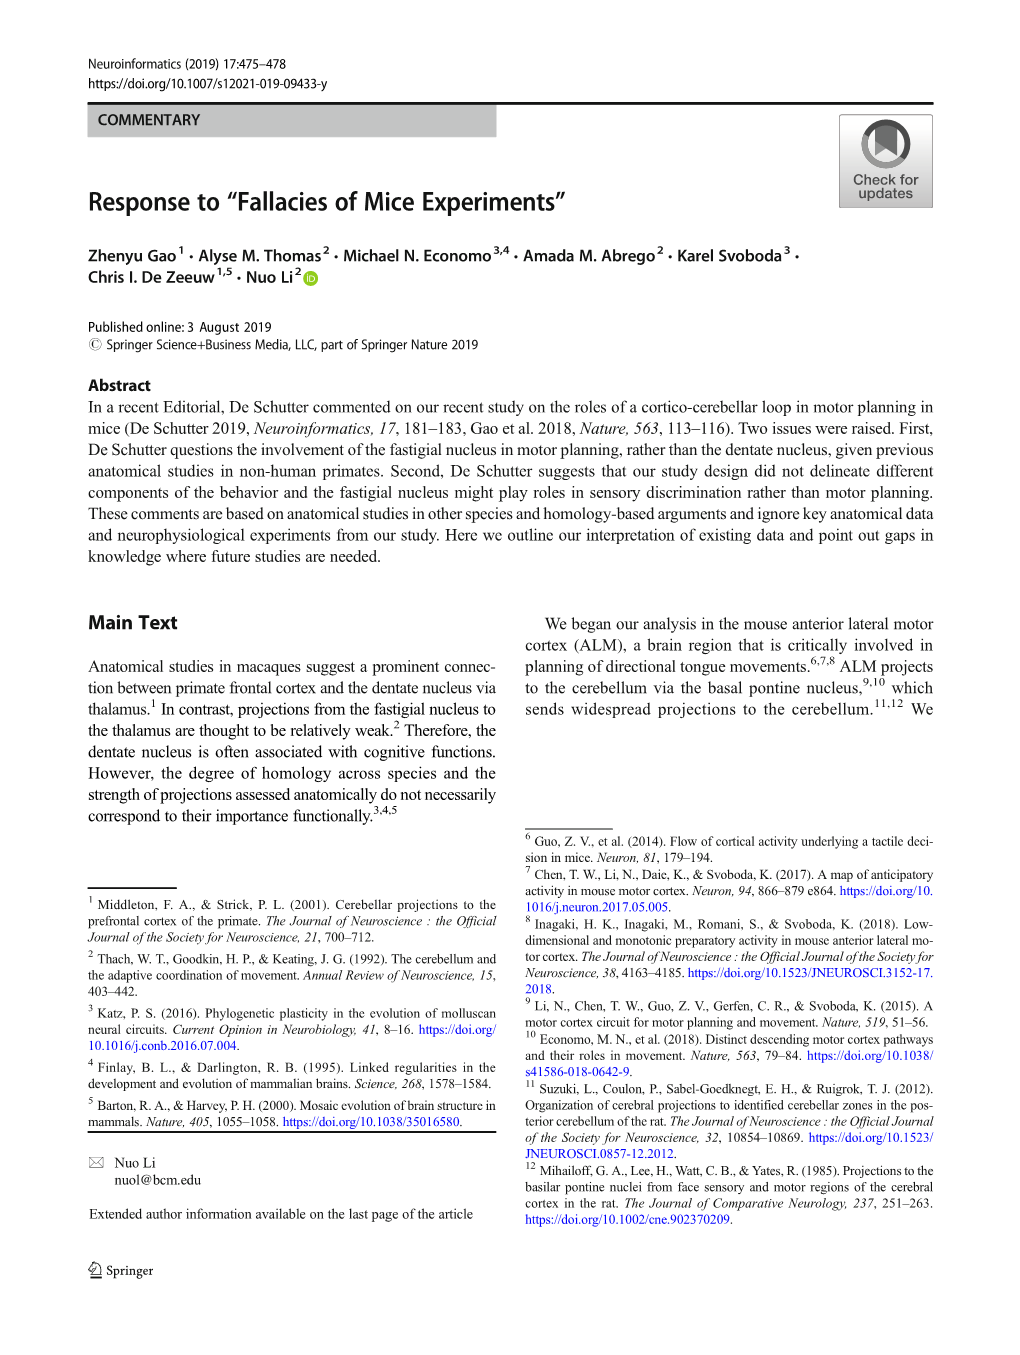 Response to “Fallacies of Mice Experiments”